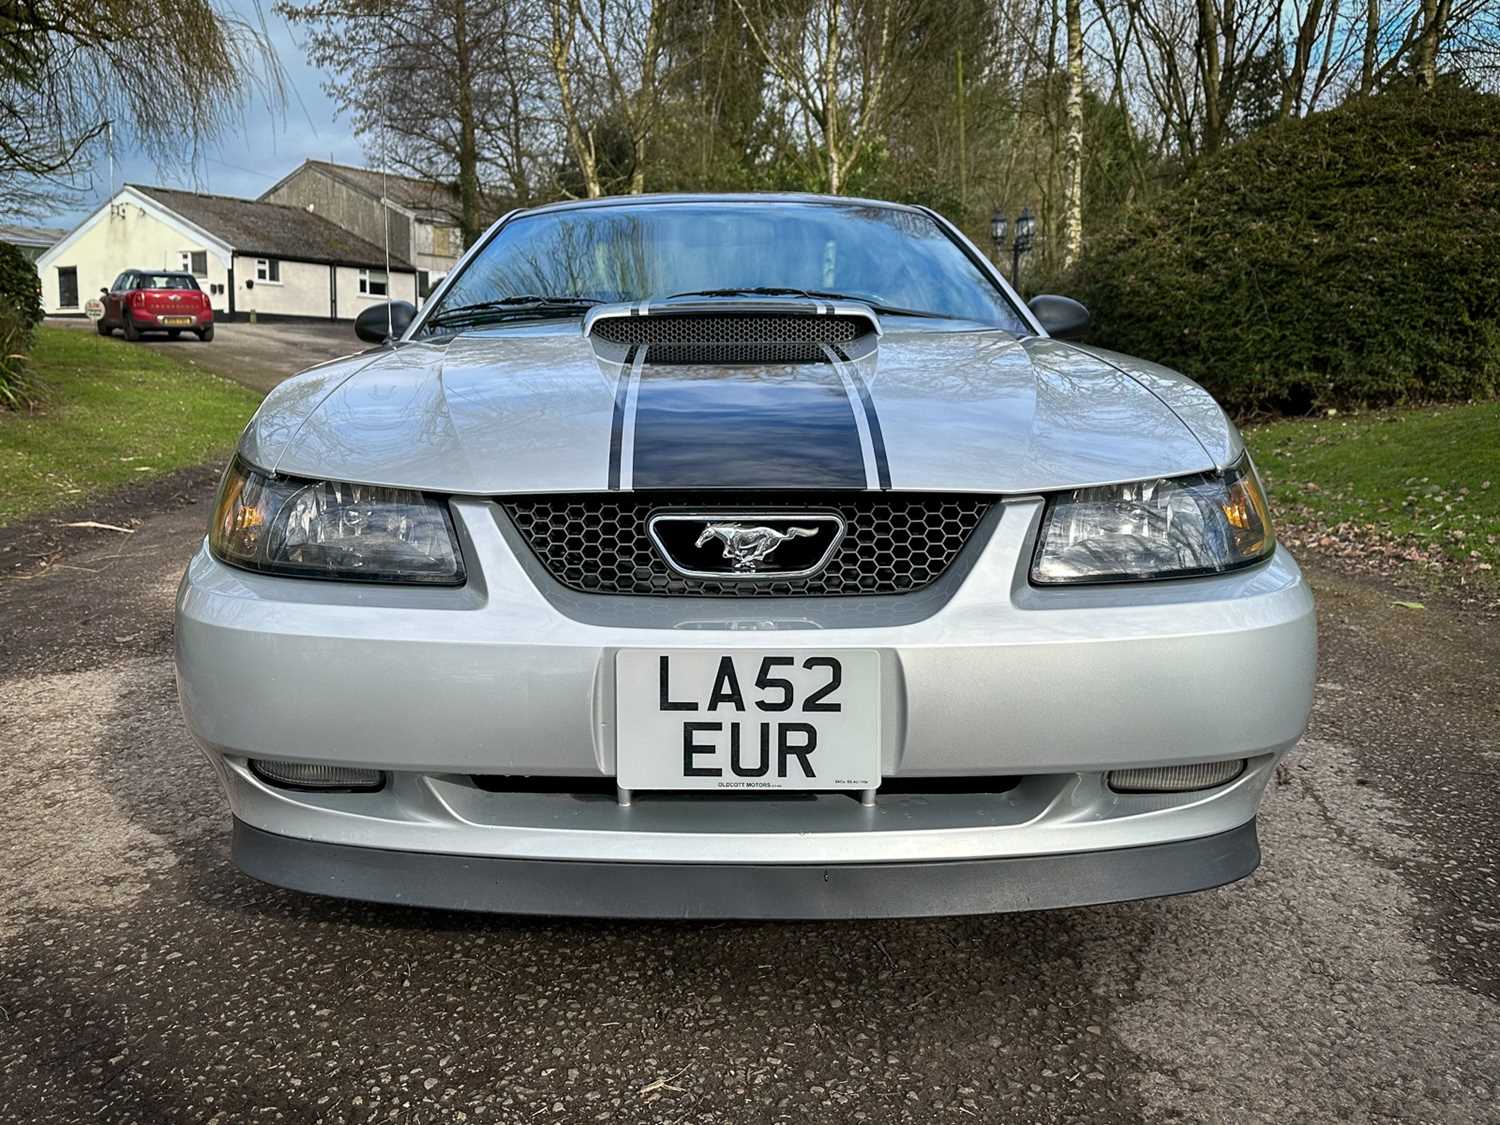 2003 Ford Mustang GT 4.6 ***NO RESERVE*** - Image 10 of 99